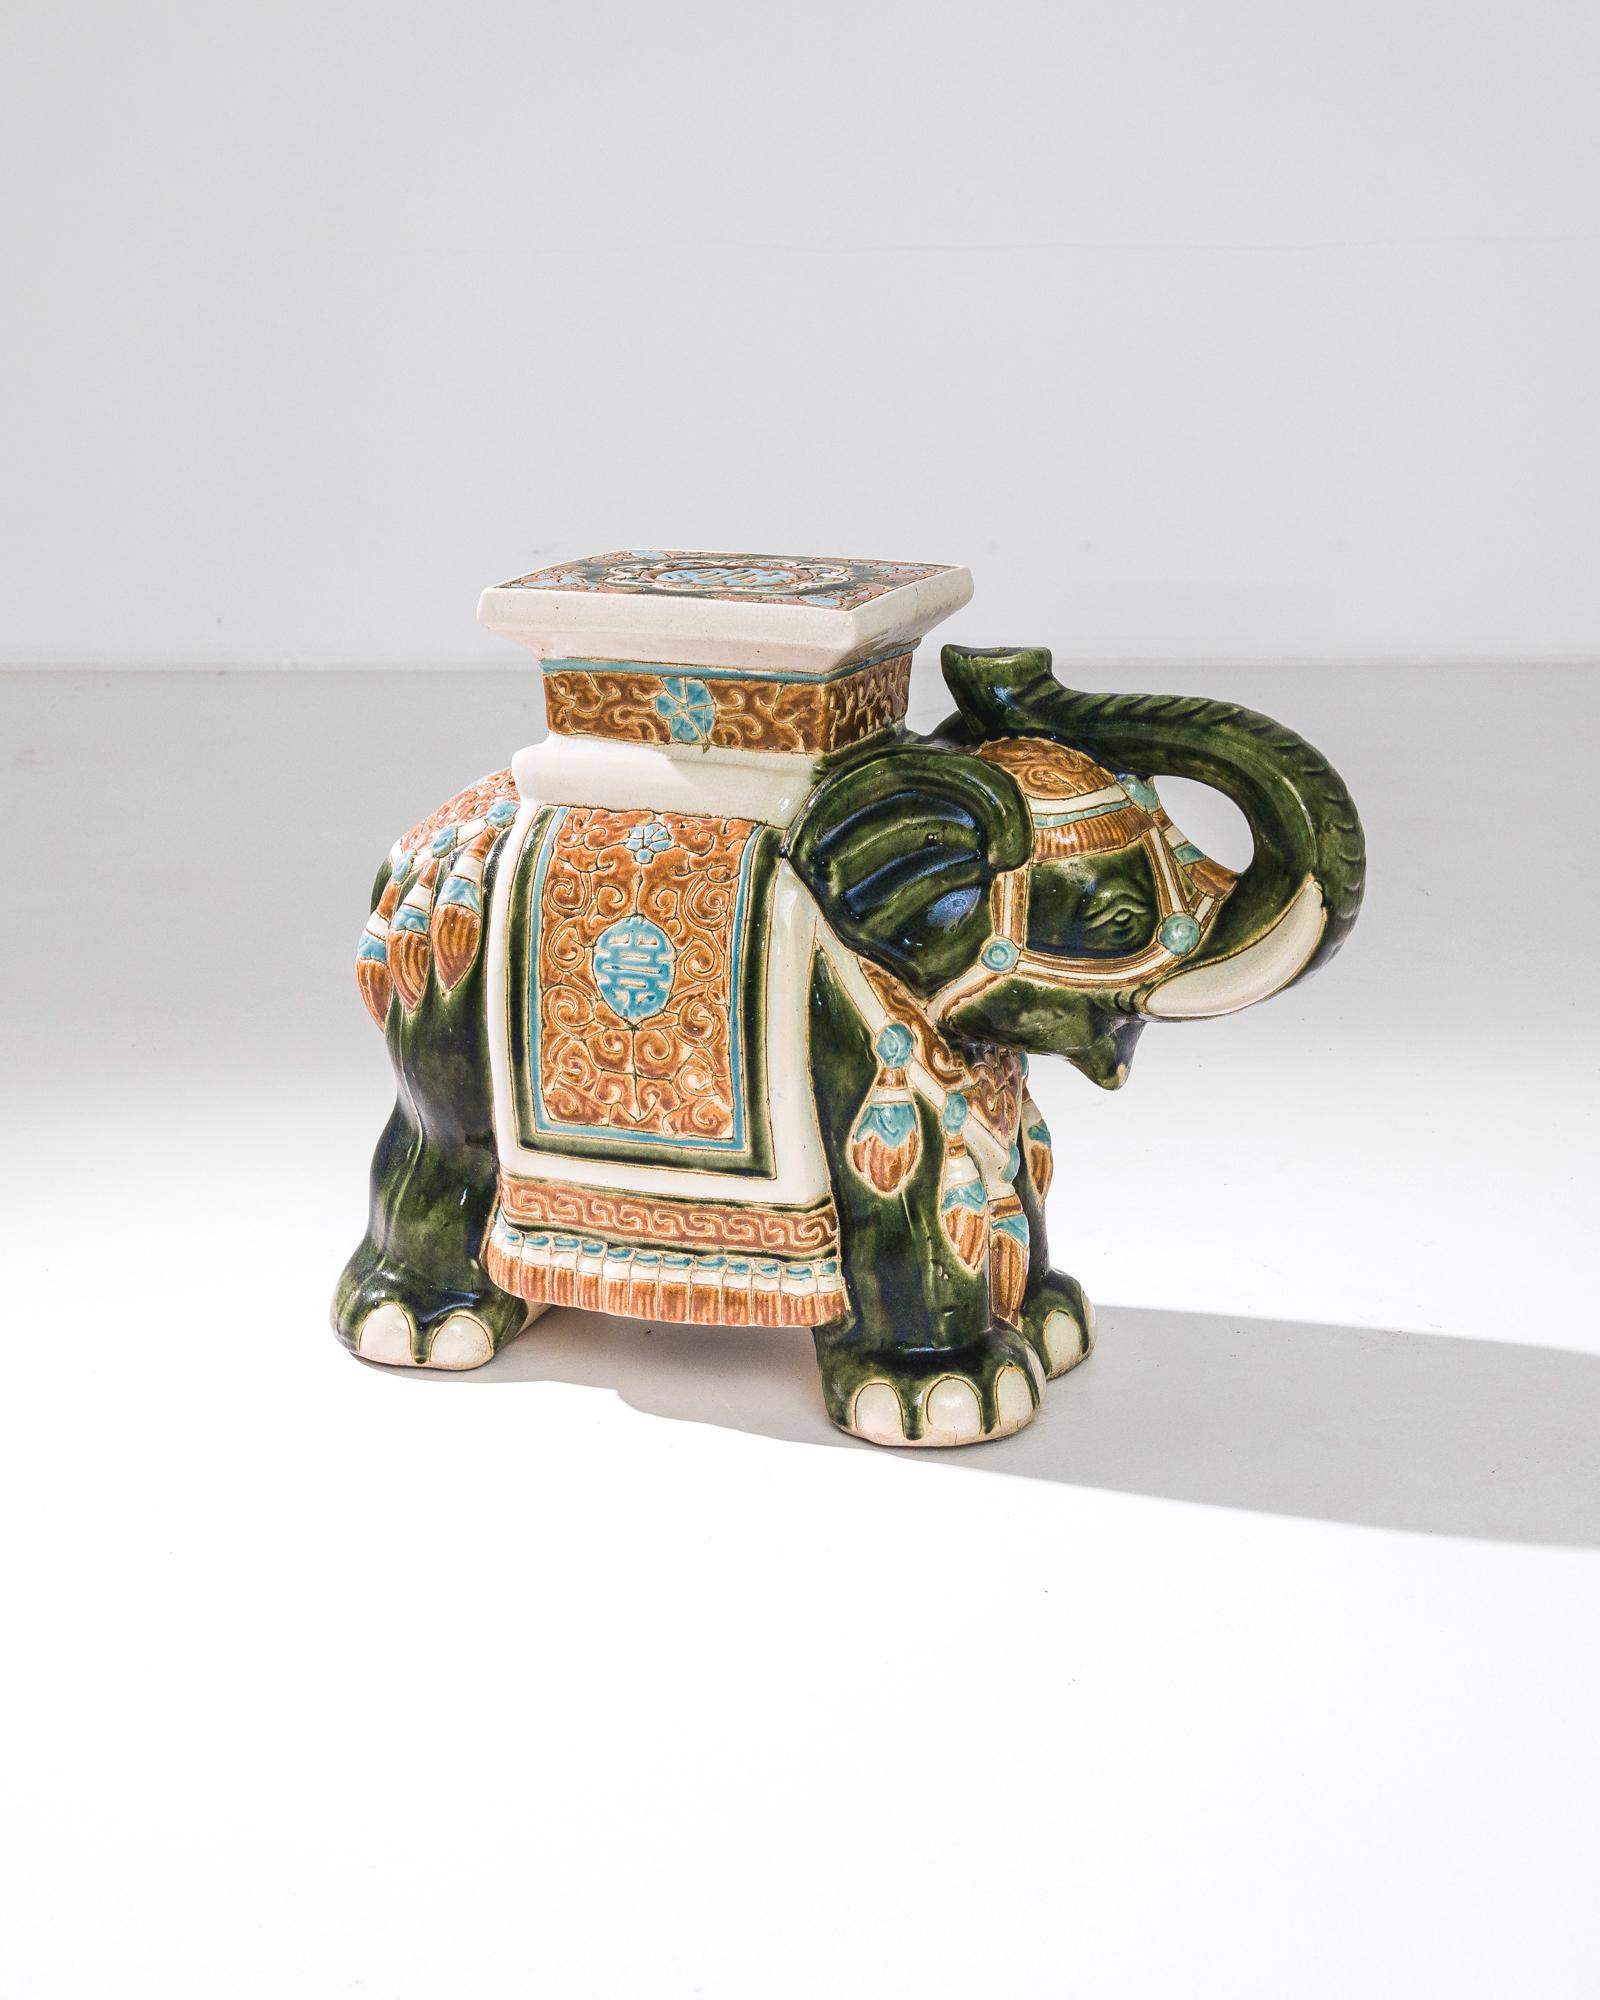 A ceramic decoration from 1960s France in the shape of an elephant. A saddle seat and blanket are glazed with celadon hues, laced with powder blue and a was of yellow ochre; the assortment of delicate patterns — reflecting Chinese and Arabic